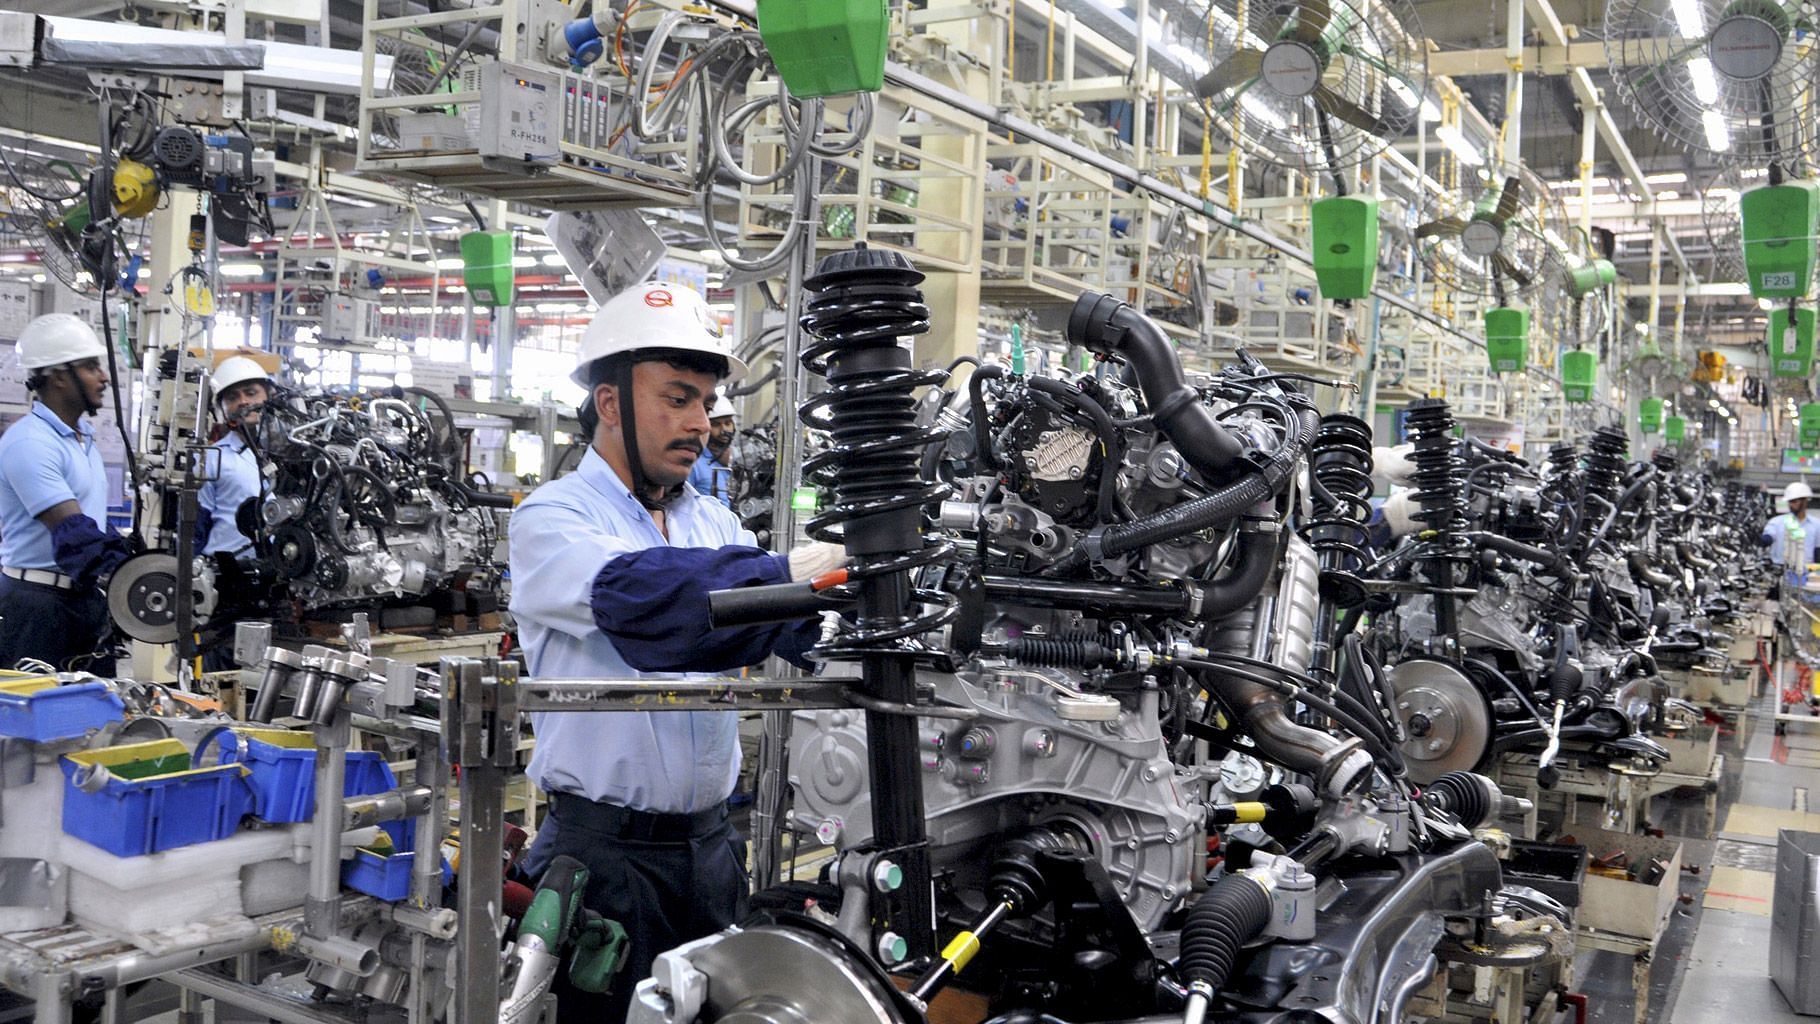 An employee works on Toyota car engines inside the manufacturing plant of Toyota Kirloskar Motor in Bidadi, on the outskirts of Bengaluru, 2015. (Photo: Reuters)